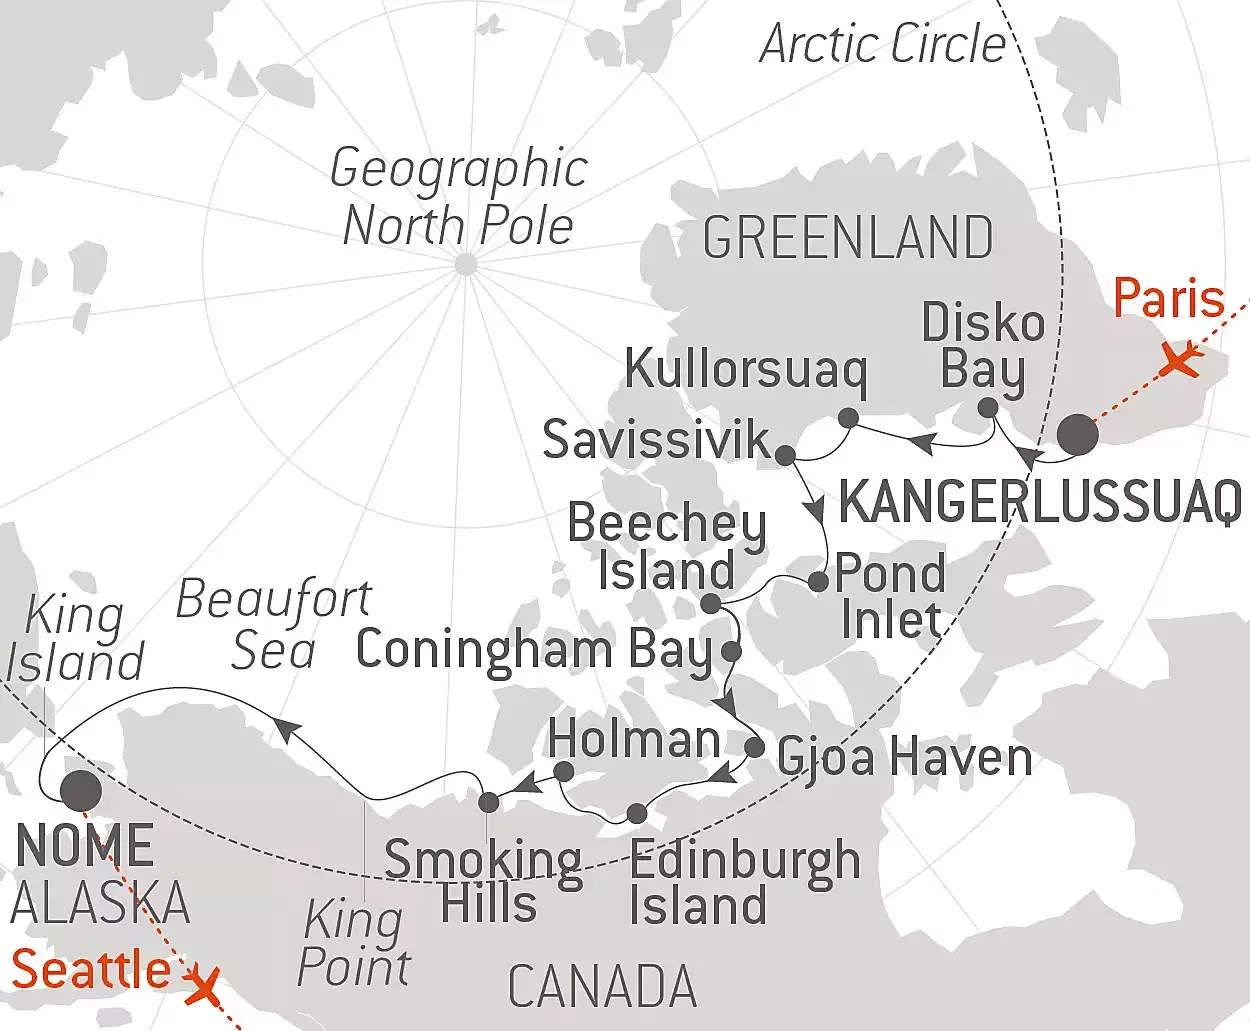 Route map of Northwest Passage, in The Wake of Roald Amundsen voyage from Kangerlussuaq, Greenland, to Nome, Alaska. Charter flights bookend this voyage, starting with a flight from Paris, France to meet the ship in Greenland, and ending with a flight from Nome, Alaska to end in Seattle, Washington.